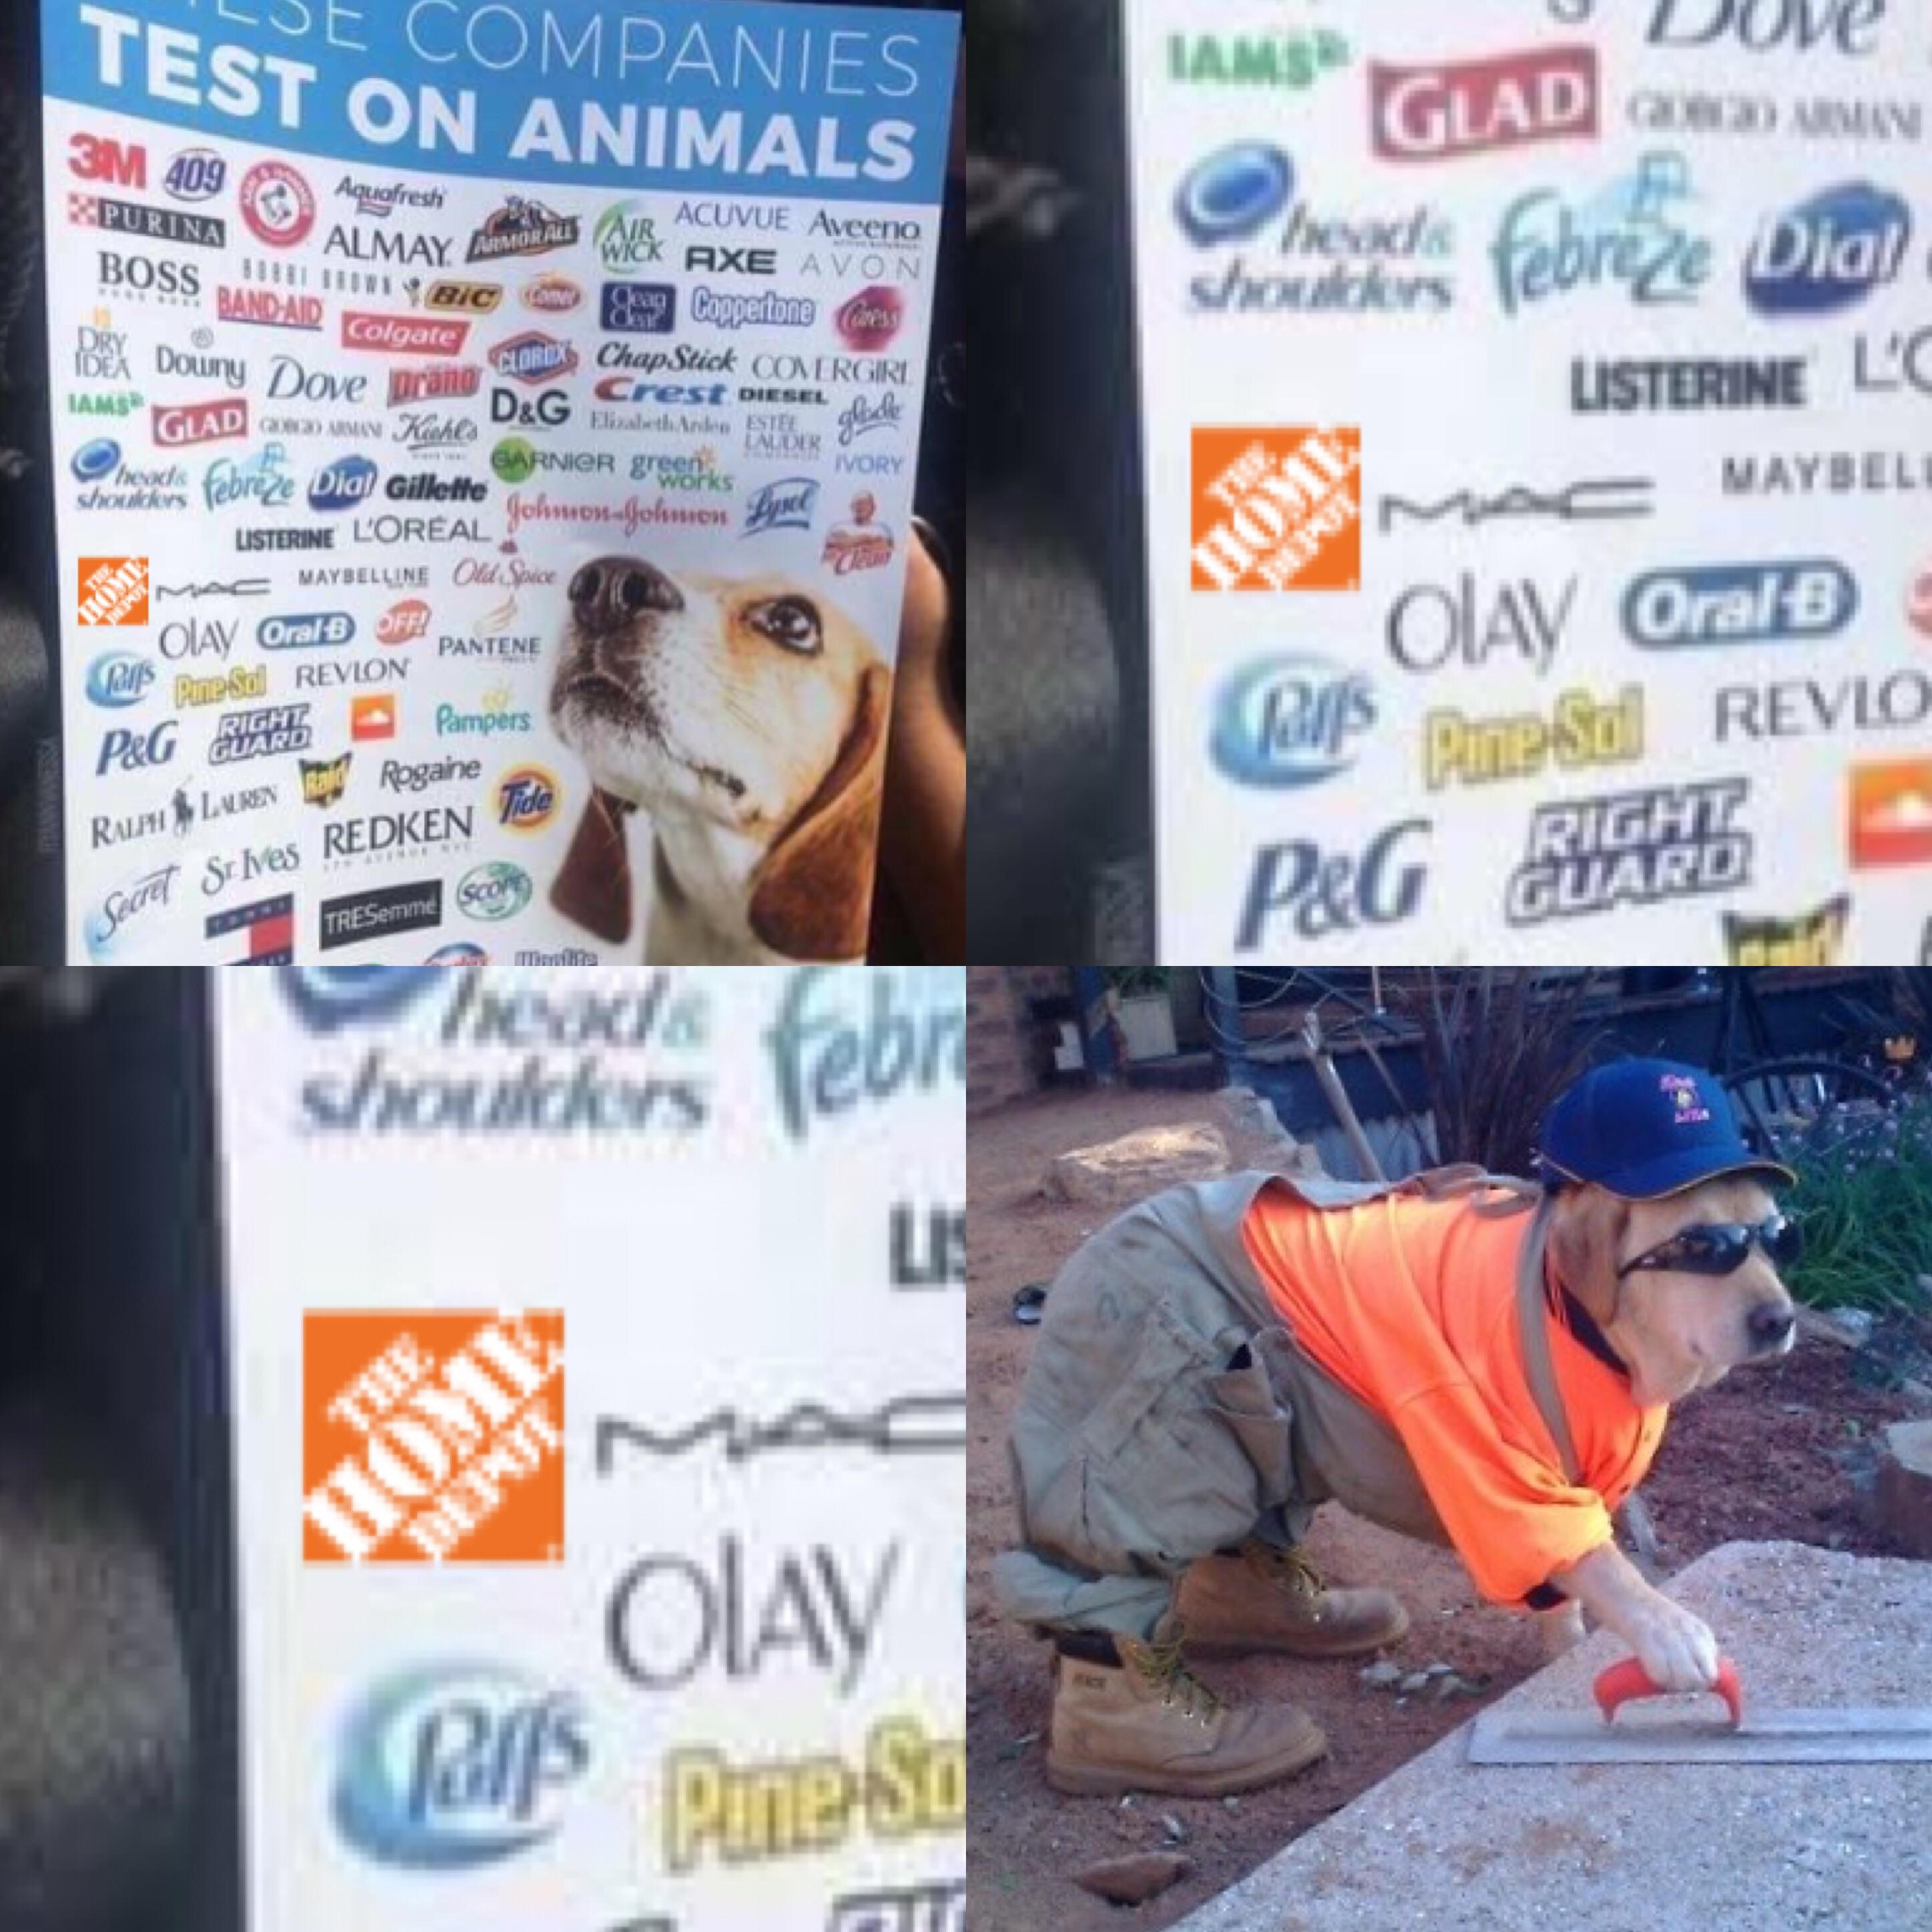 These companies test on animals